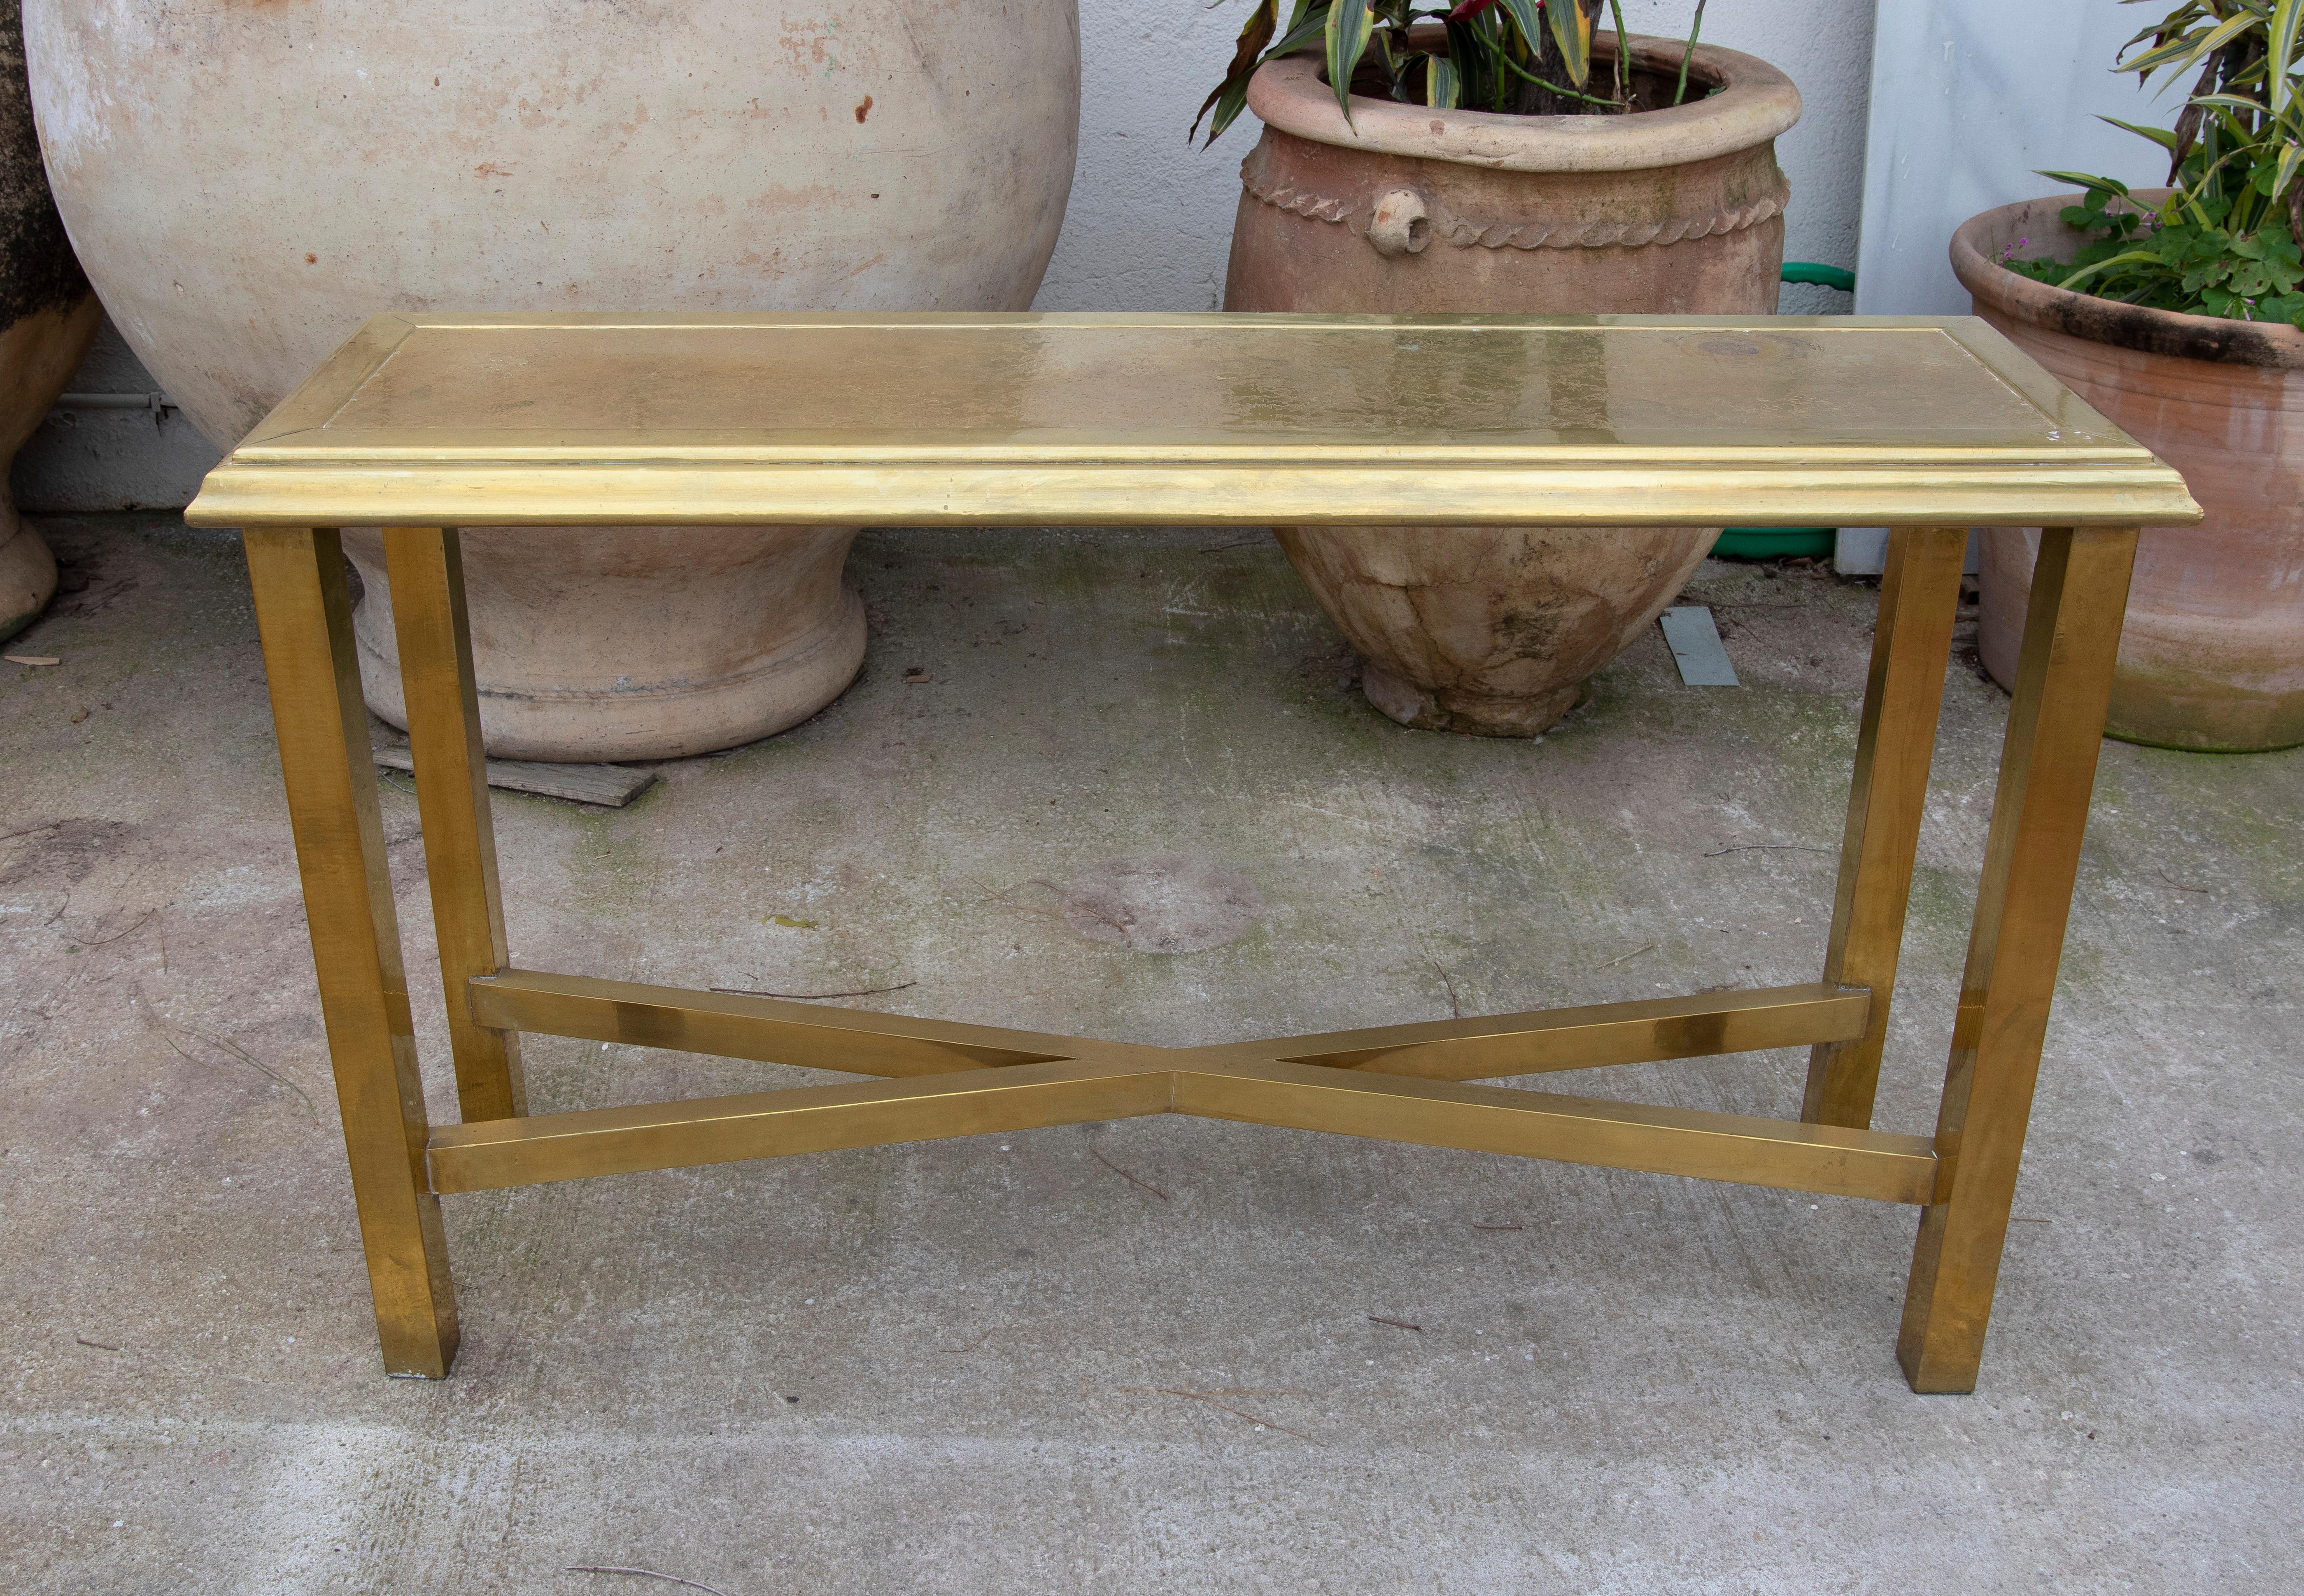 1970s Brass console signed by the Artist Gony Nava.